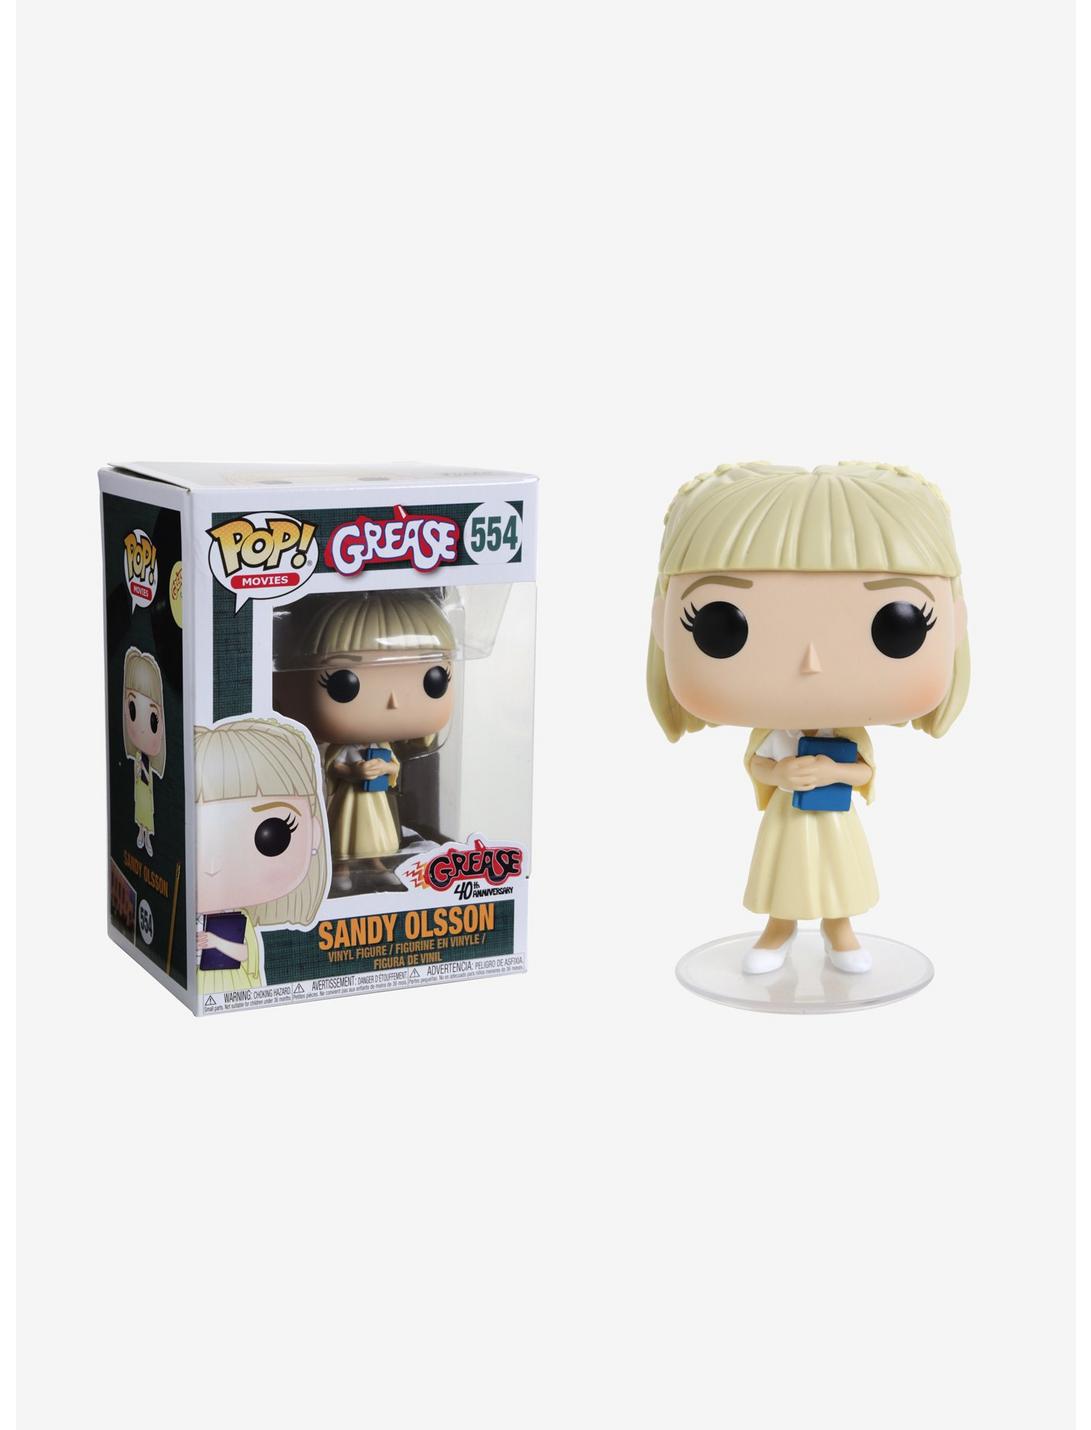 Sandy Olsson Grease Official Funko Pop Vinyl Figure Collectables 